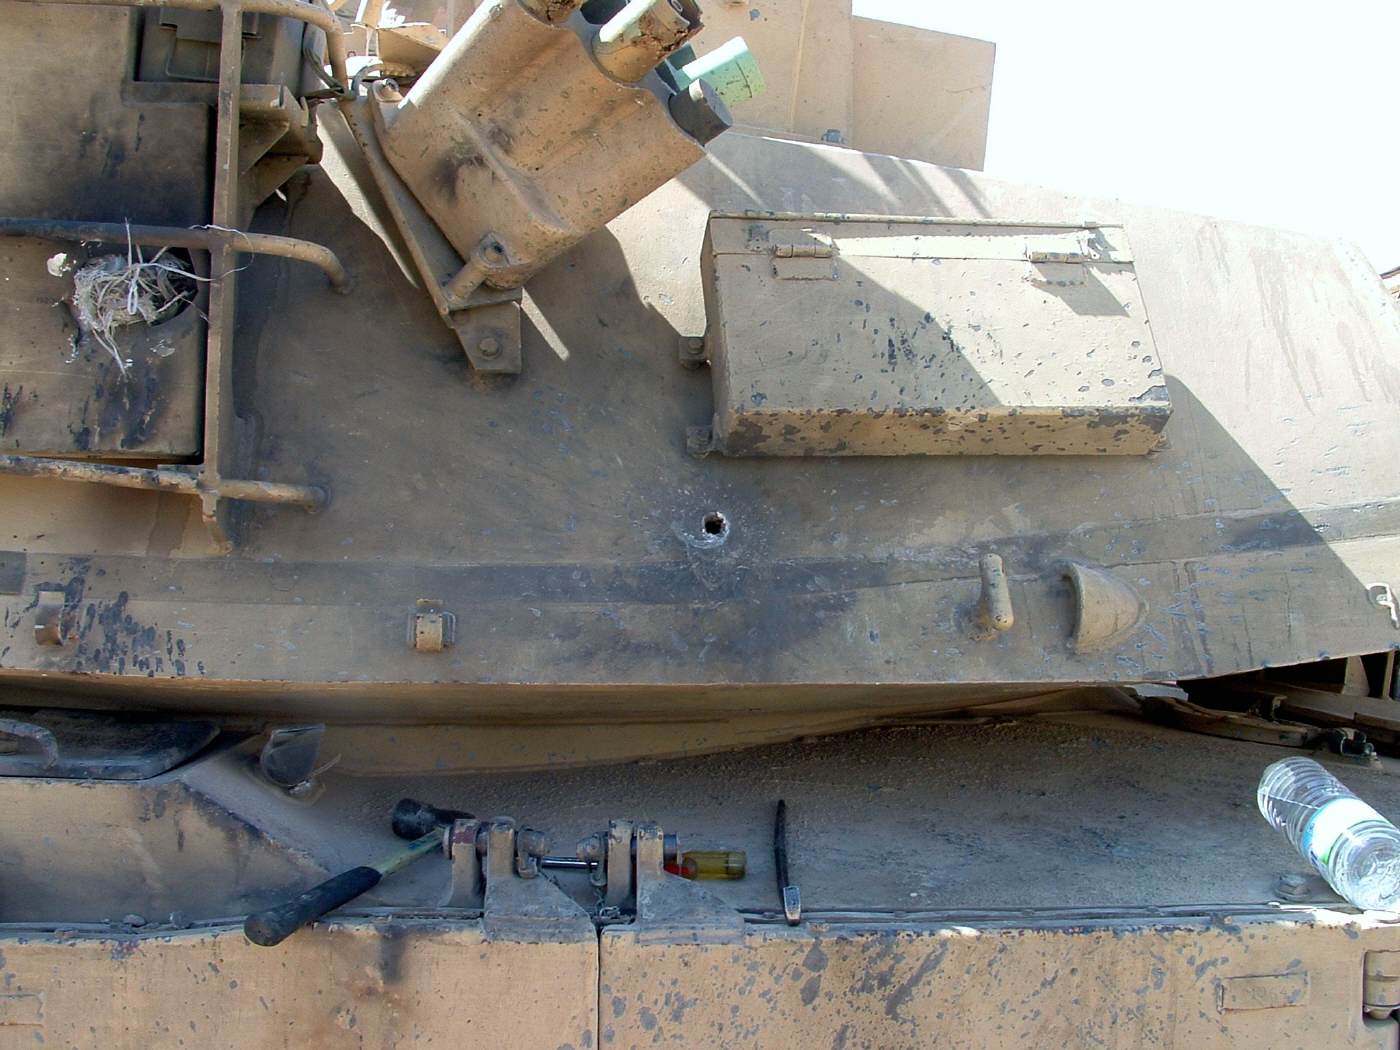 %20Abrams%20that%20have%20been%20hit%20by%20IED%20and%20RPG_18.jpg